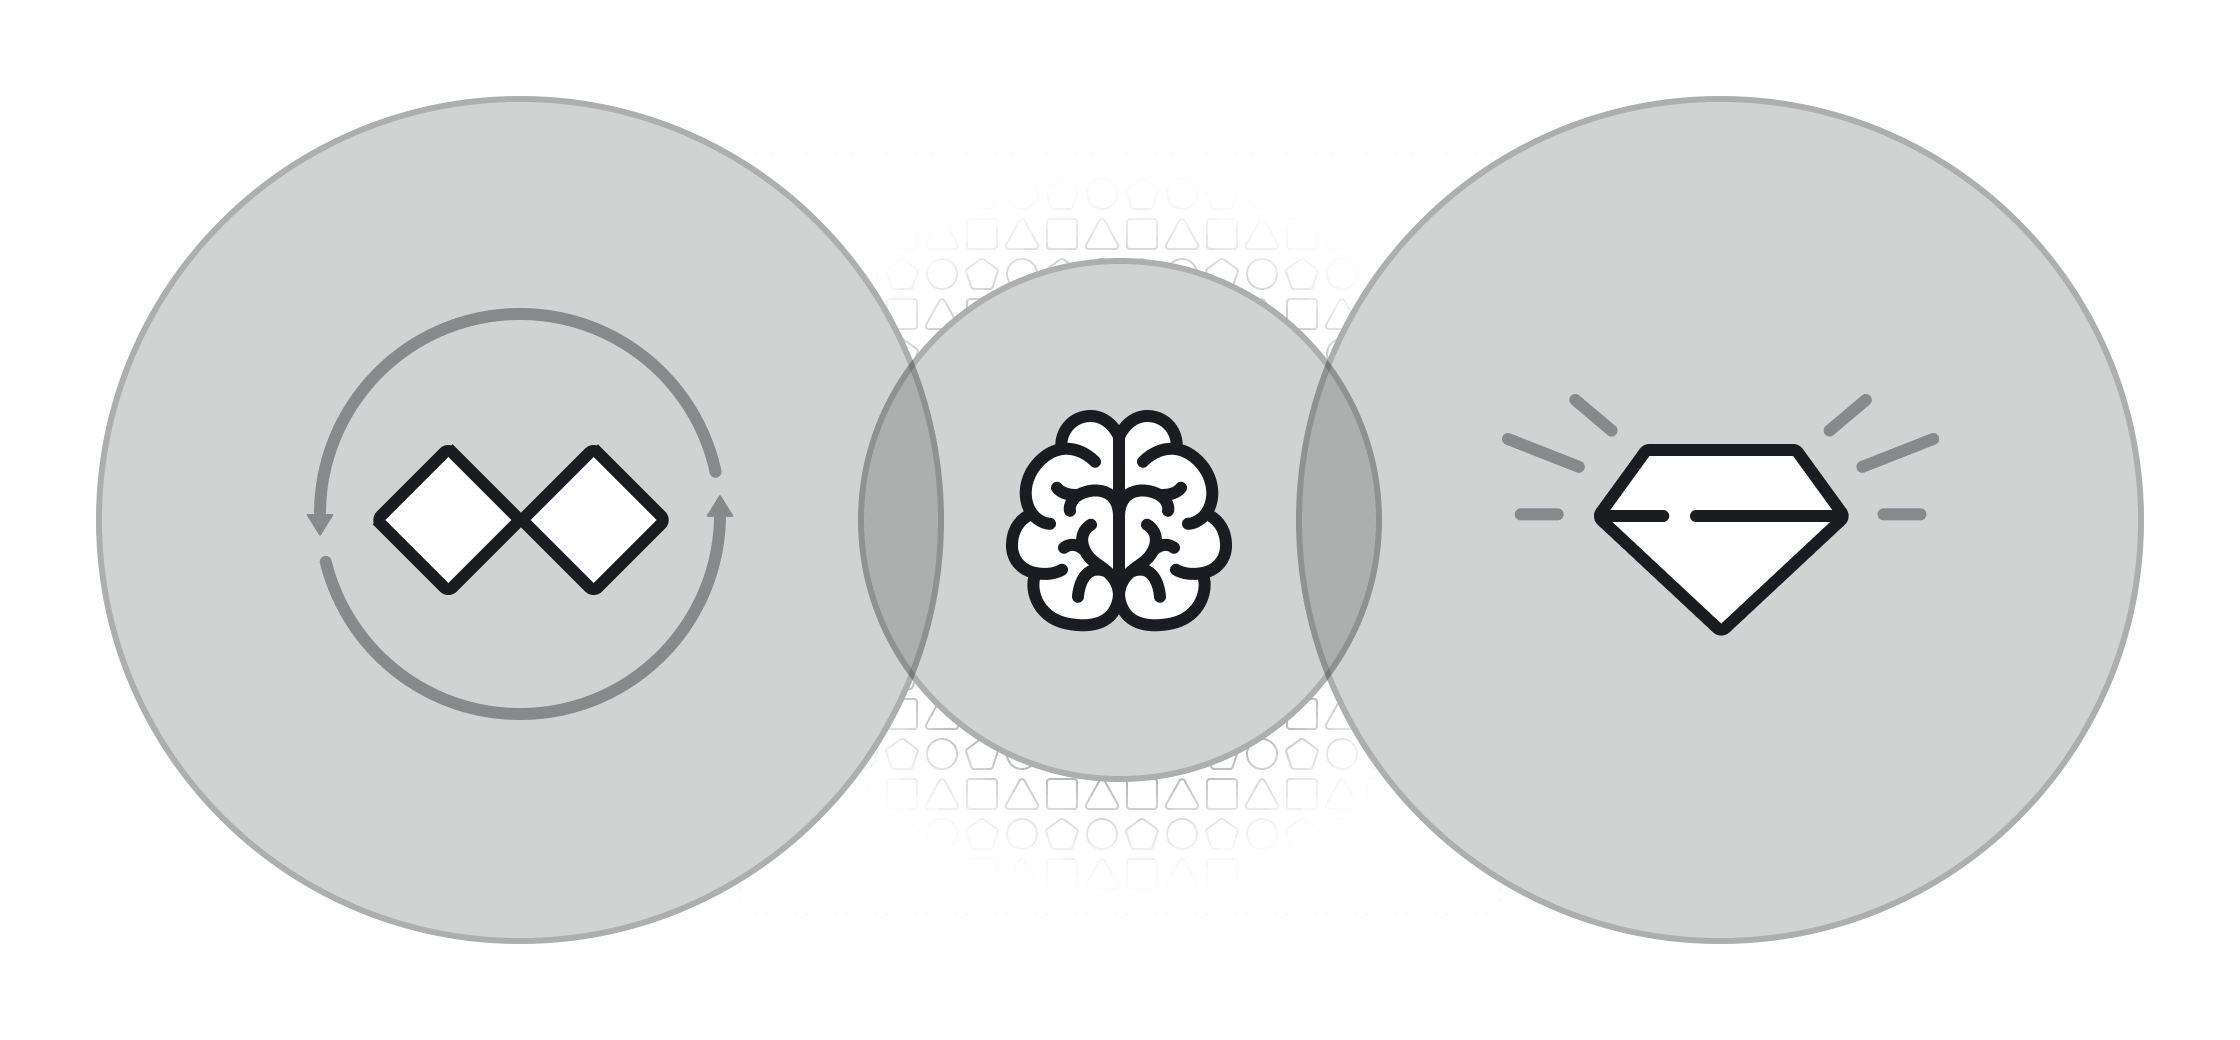 Illustration of the design double diamond symbol, brain, and a diamond in a row